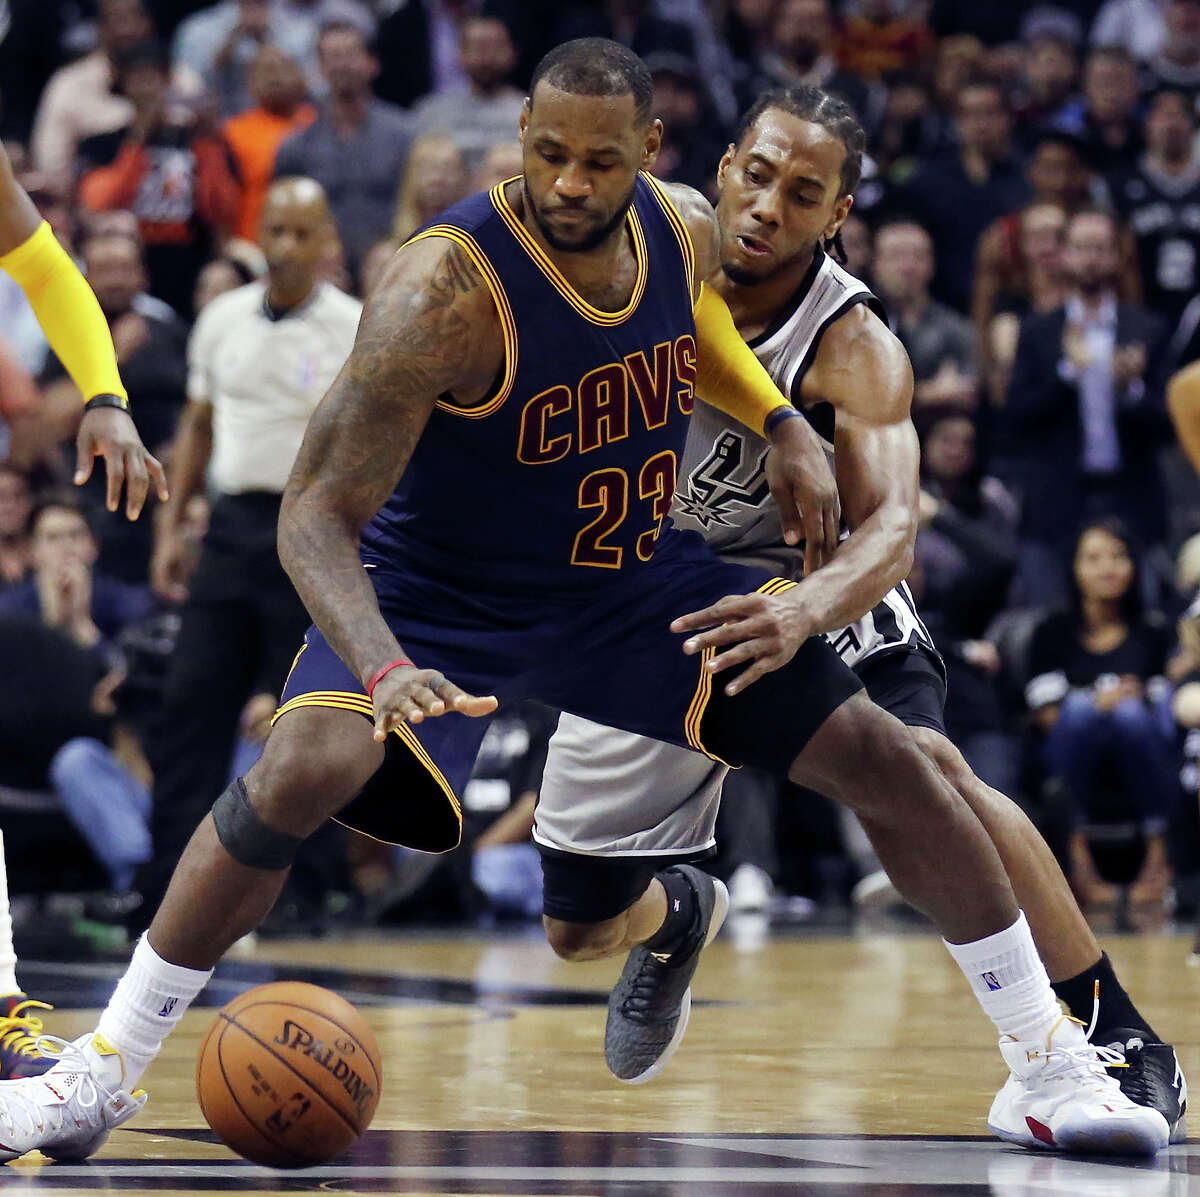 Cleveland Cavaliers’ LeBron James looks for room around the Spurs’ Kawhi Leonard during overtime action on March 12, 2015 at the AT&T Center. The Cavaliers won in overtime 128-125.